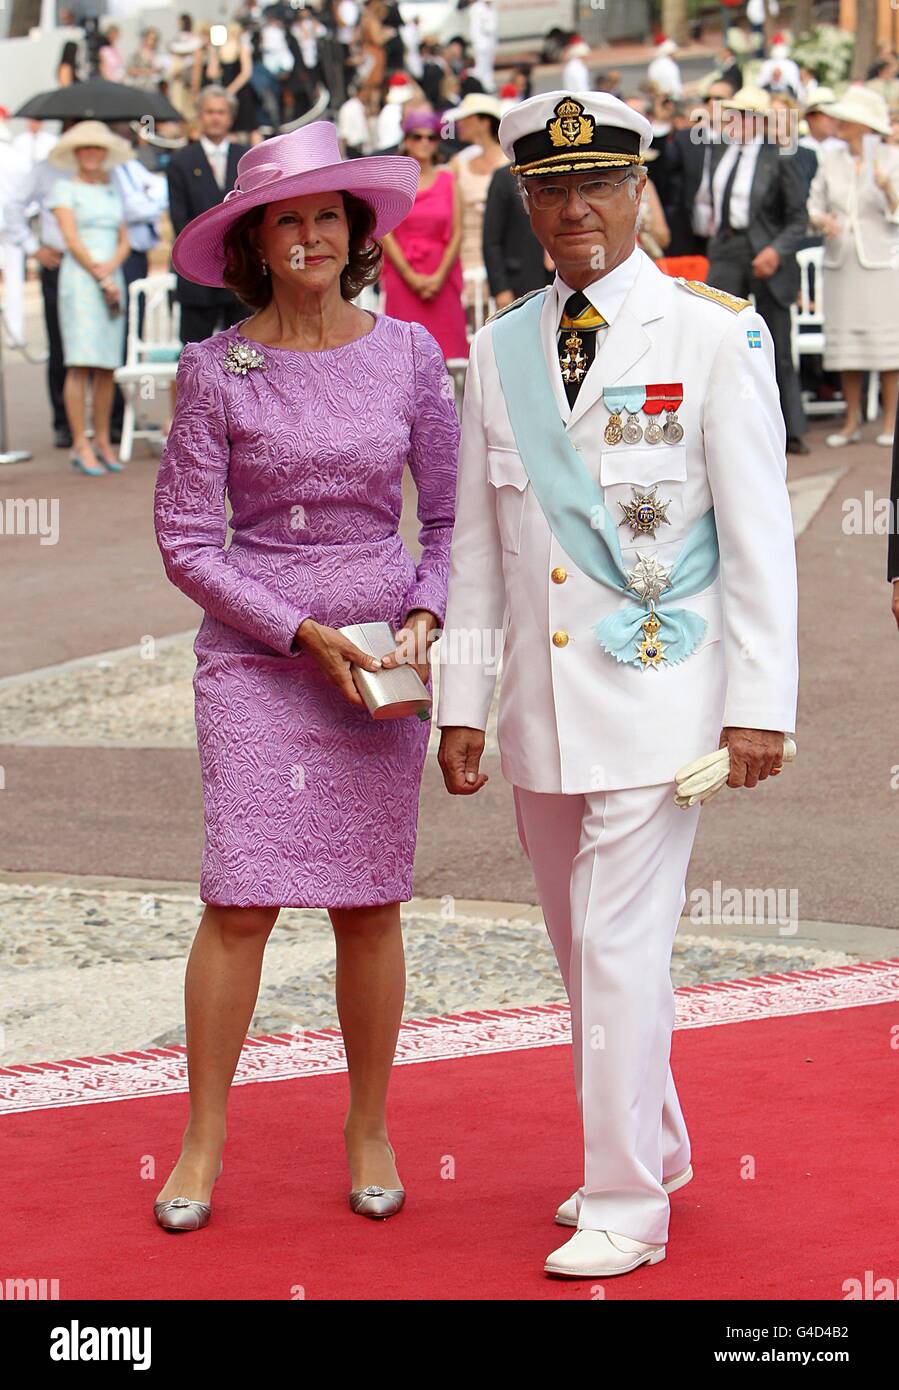 King Carl Gustav and Queen Silvia Of Sweden arriving for the wedding of Prince Albert II of Monaco and Charlene Wittstock at the Place du Palais. Stock Photo